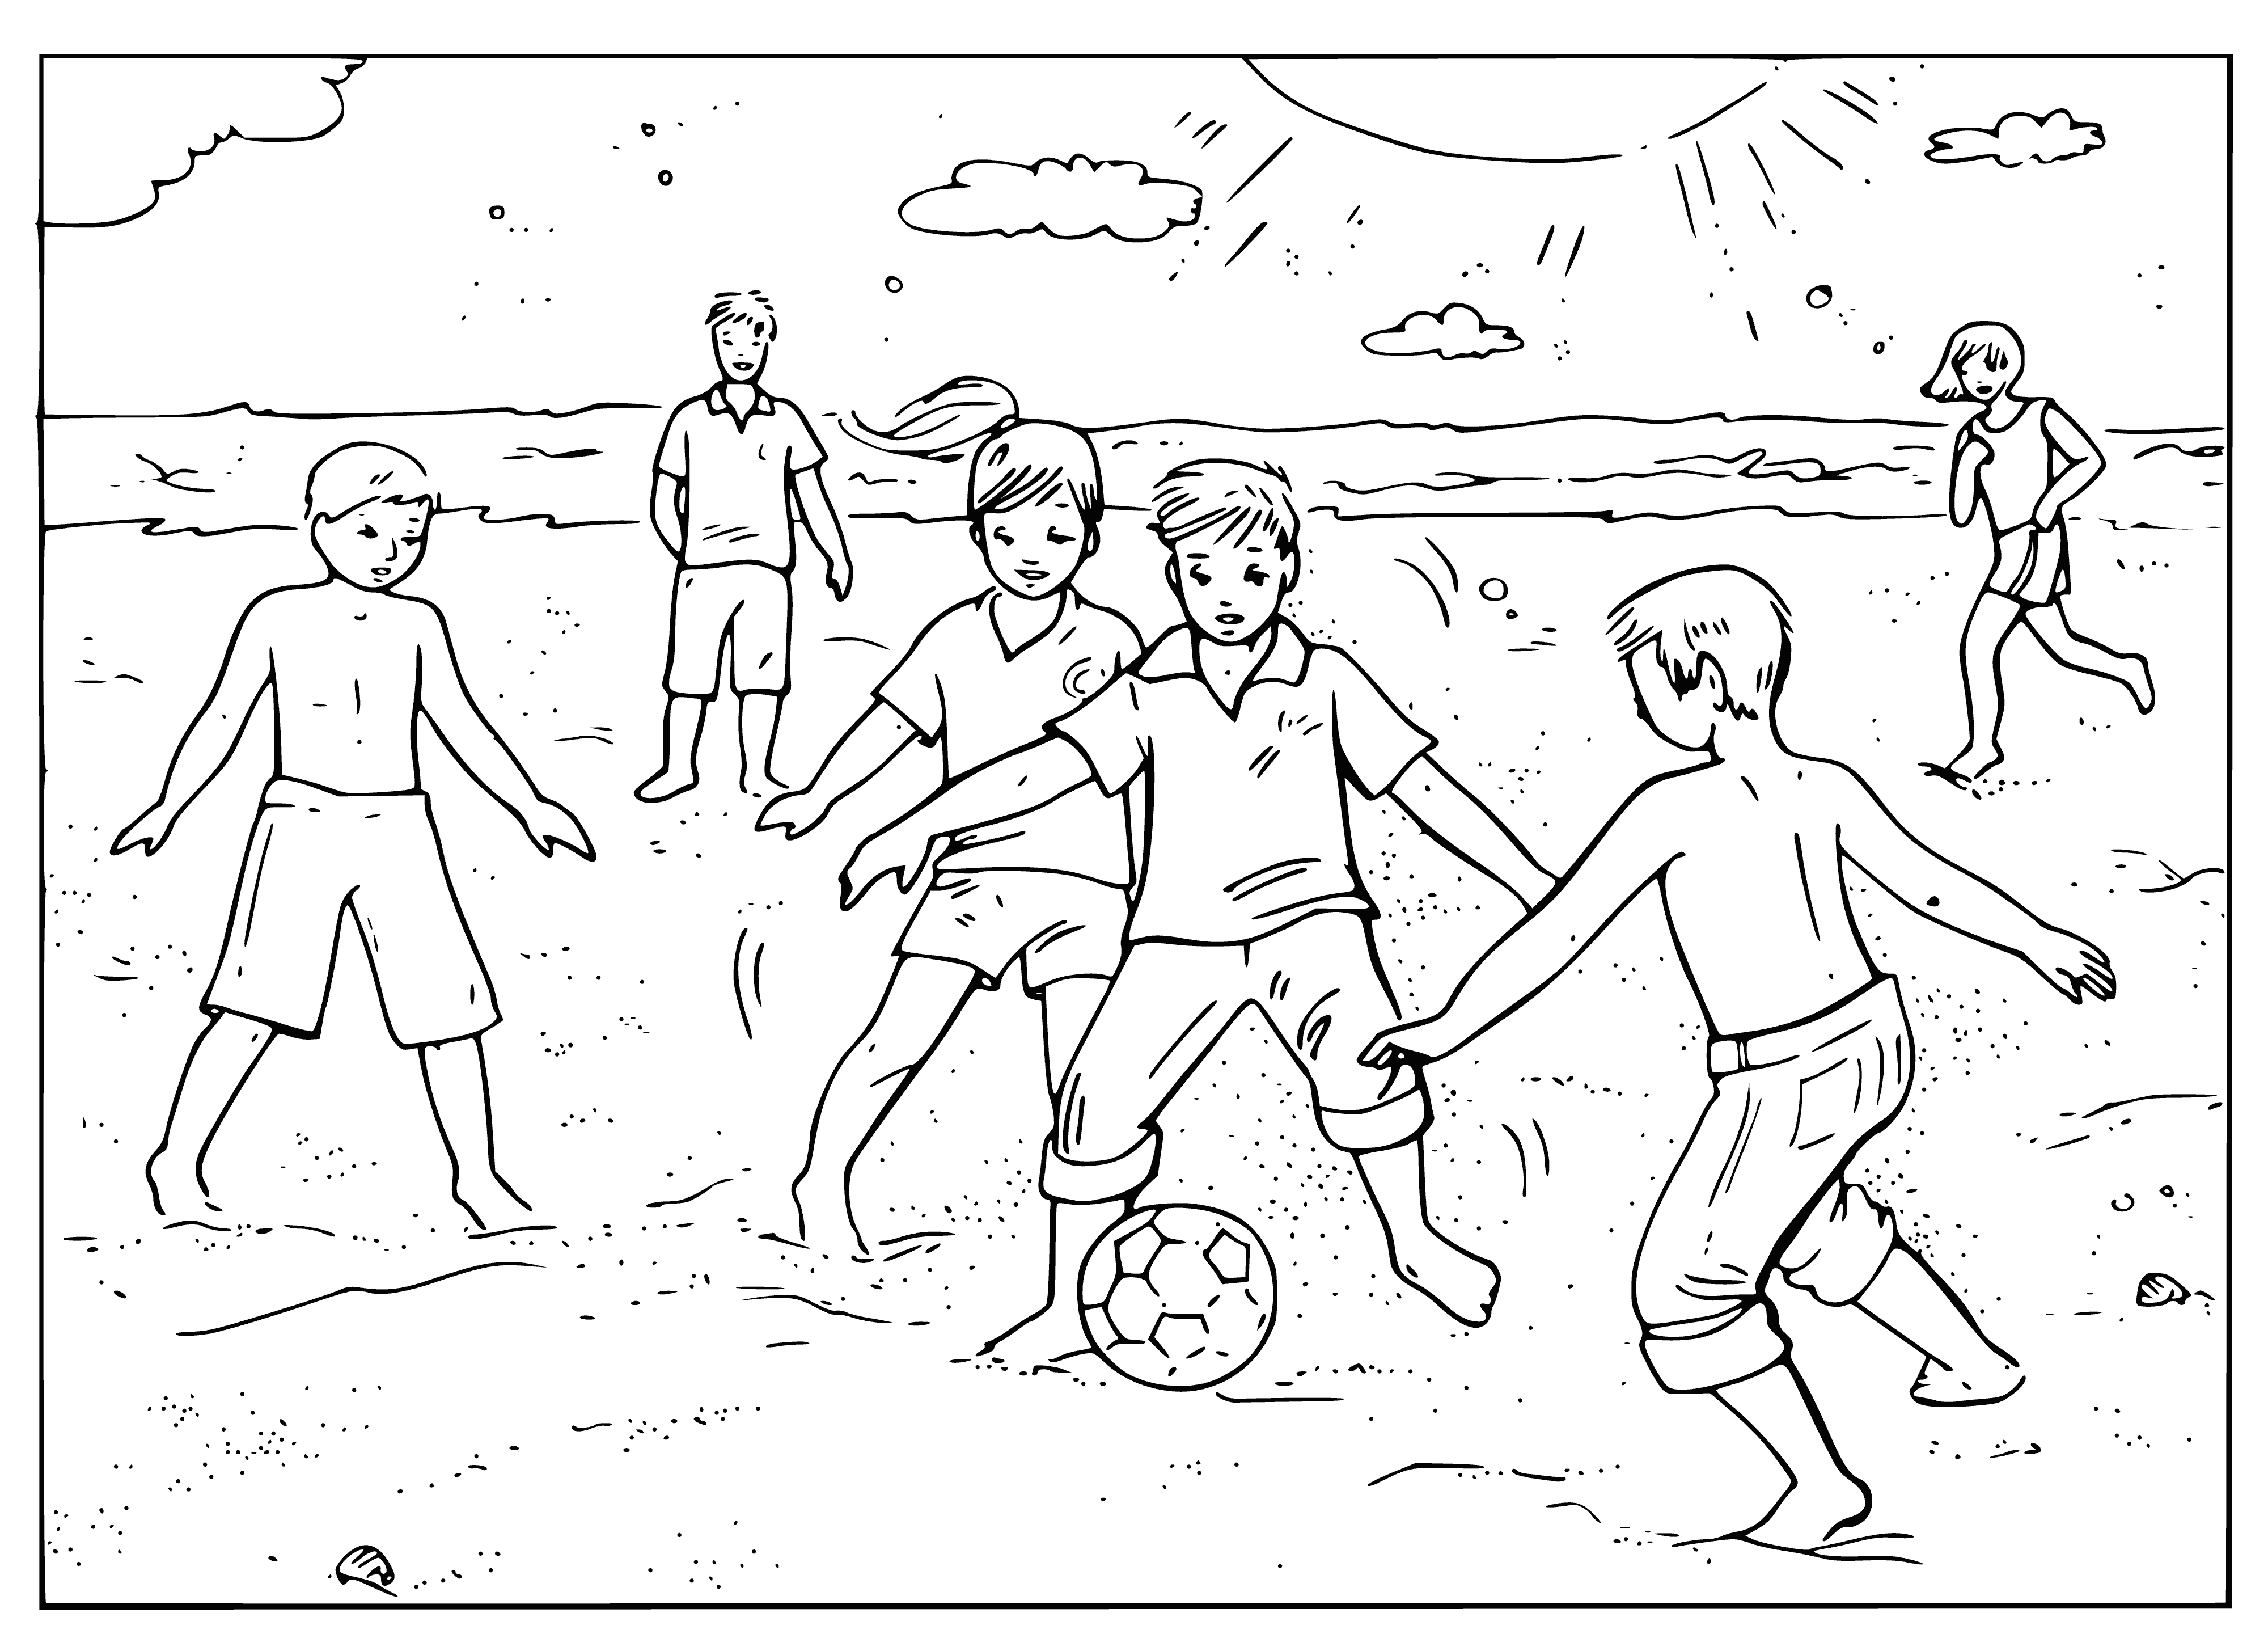 Beach soccer coloring page